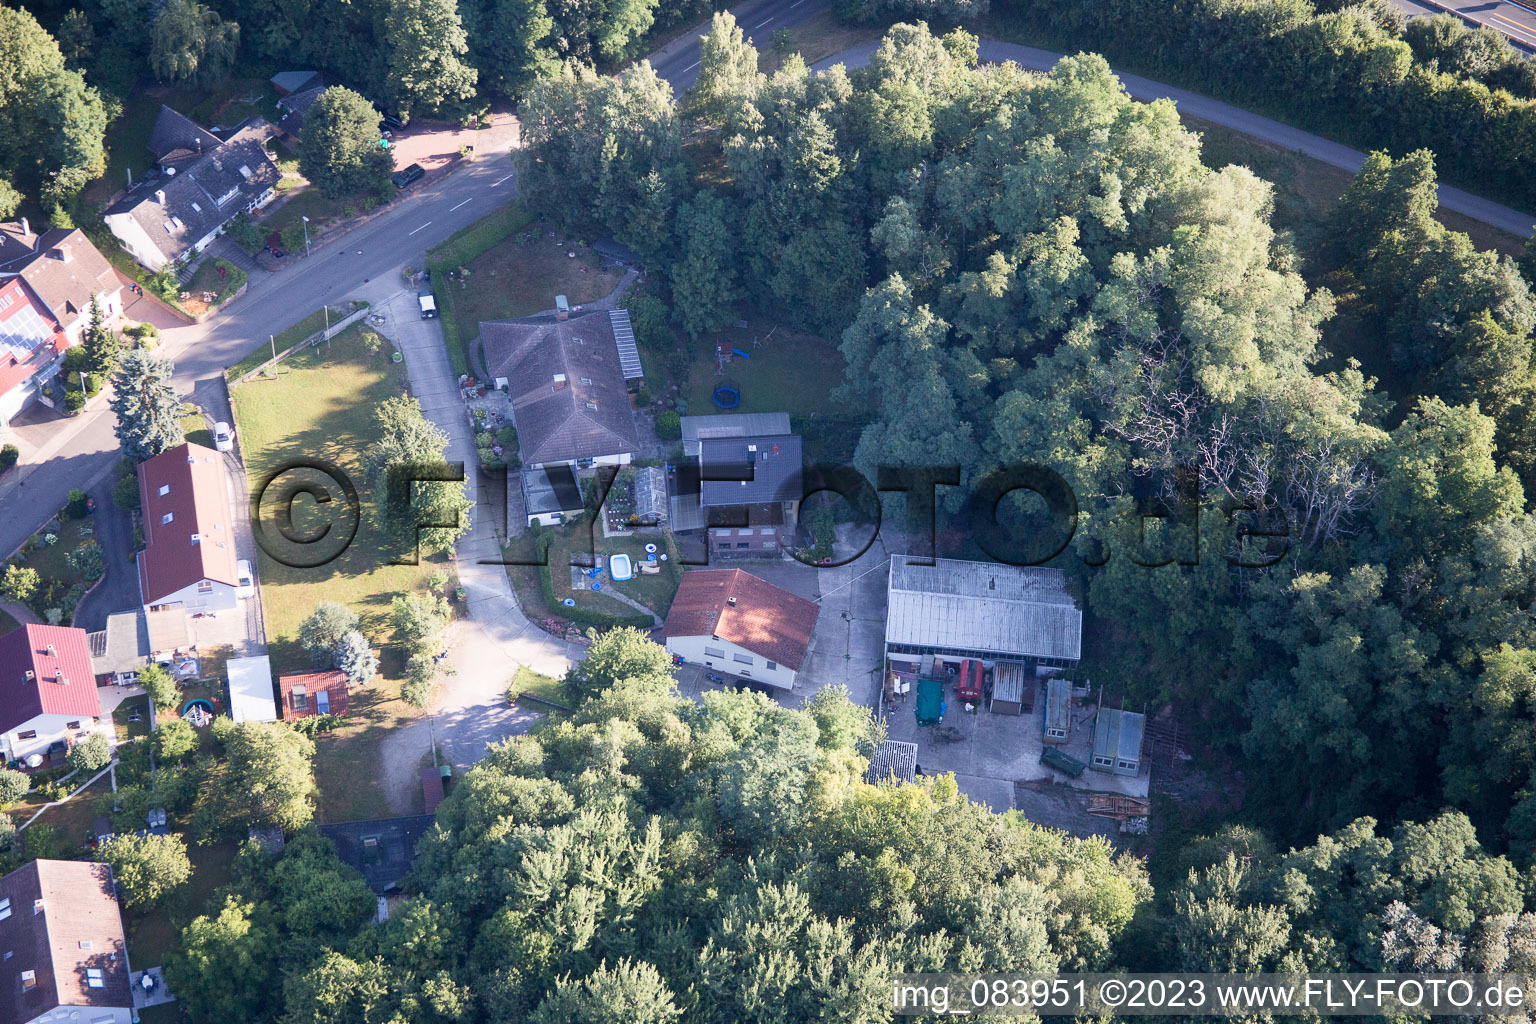 Hohenwettersbacherstraße 38, "open youth workshop Karlsruhe" at the quarry in the district Grünwettersbach in Karlsruhe in the state Baden-Wuerttemberg, Germany viewn from the air